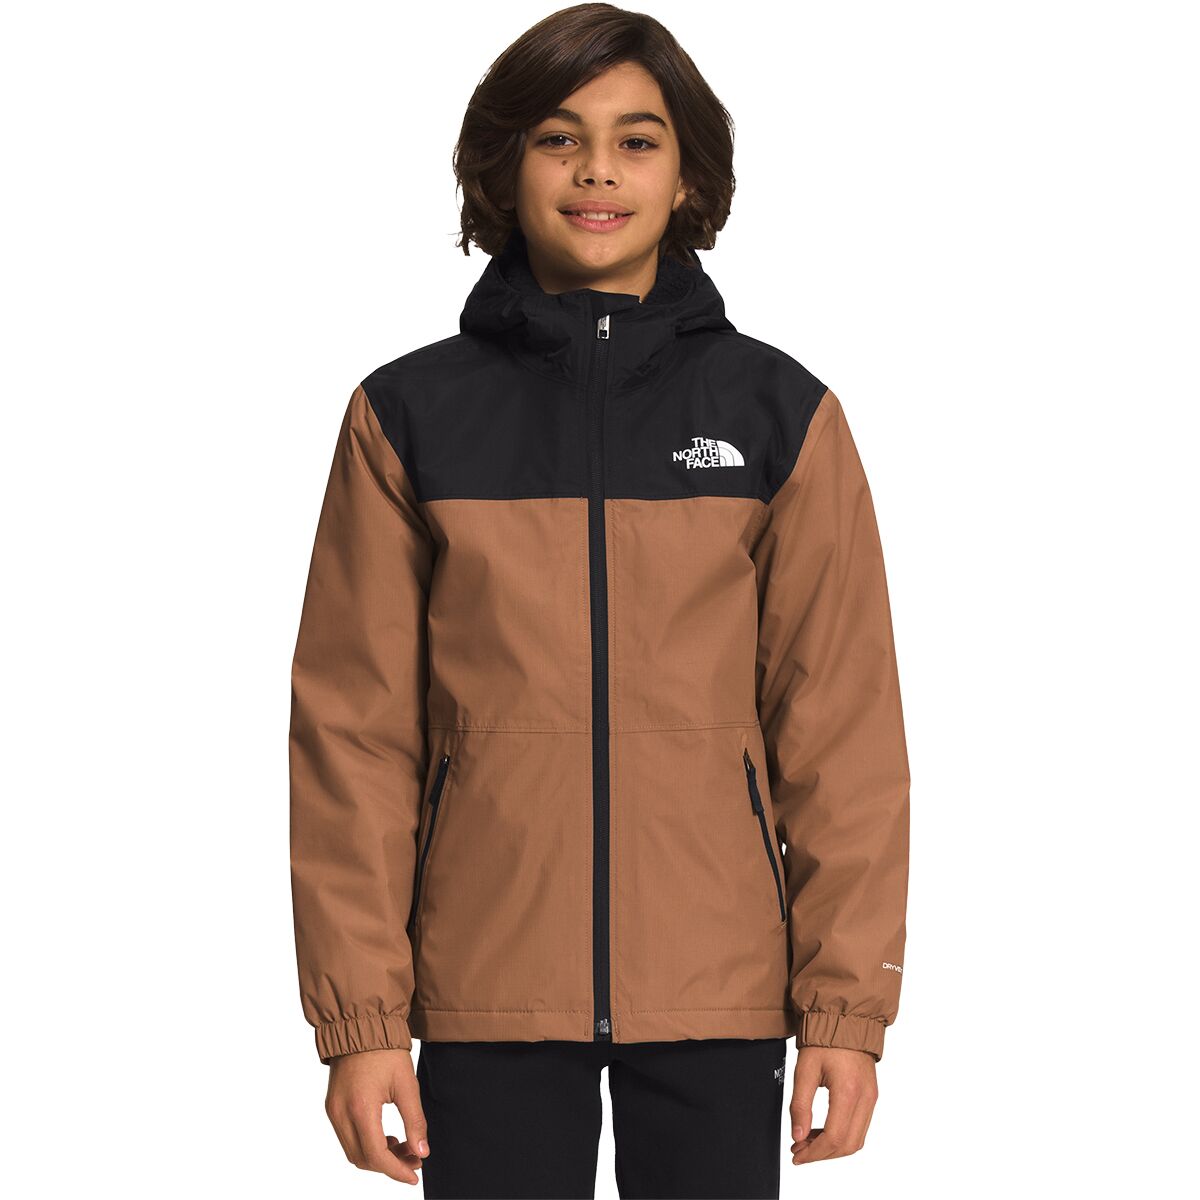 The North Face Warm Storm Hooded Jacket - Boys'